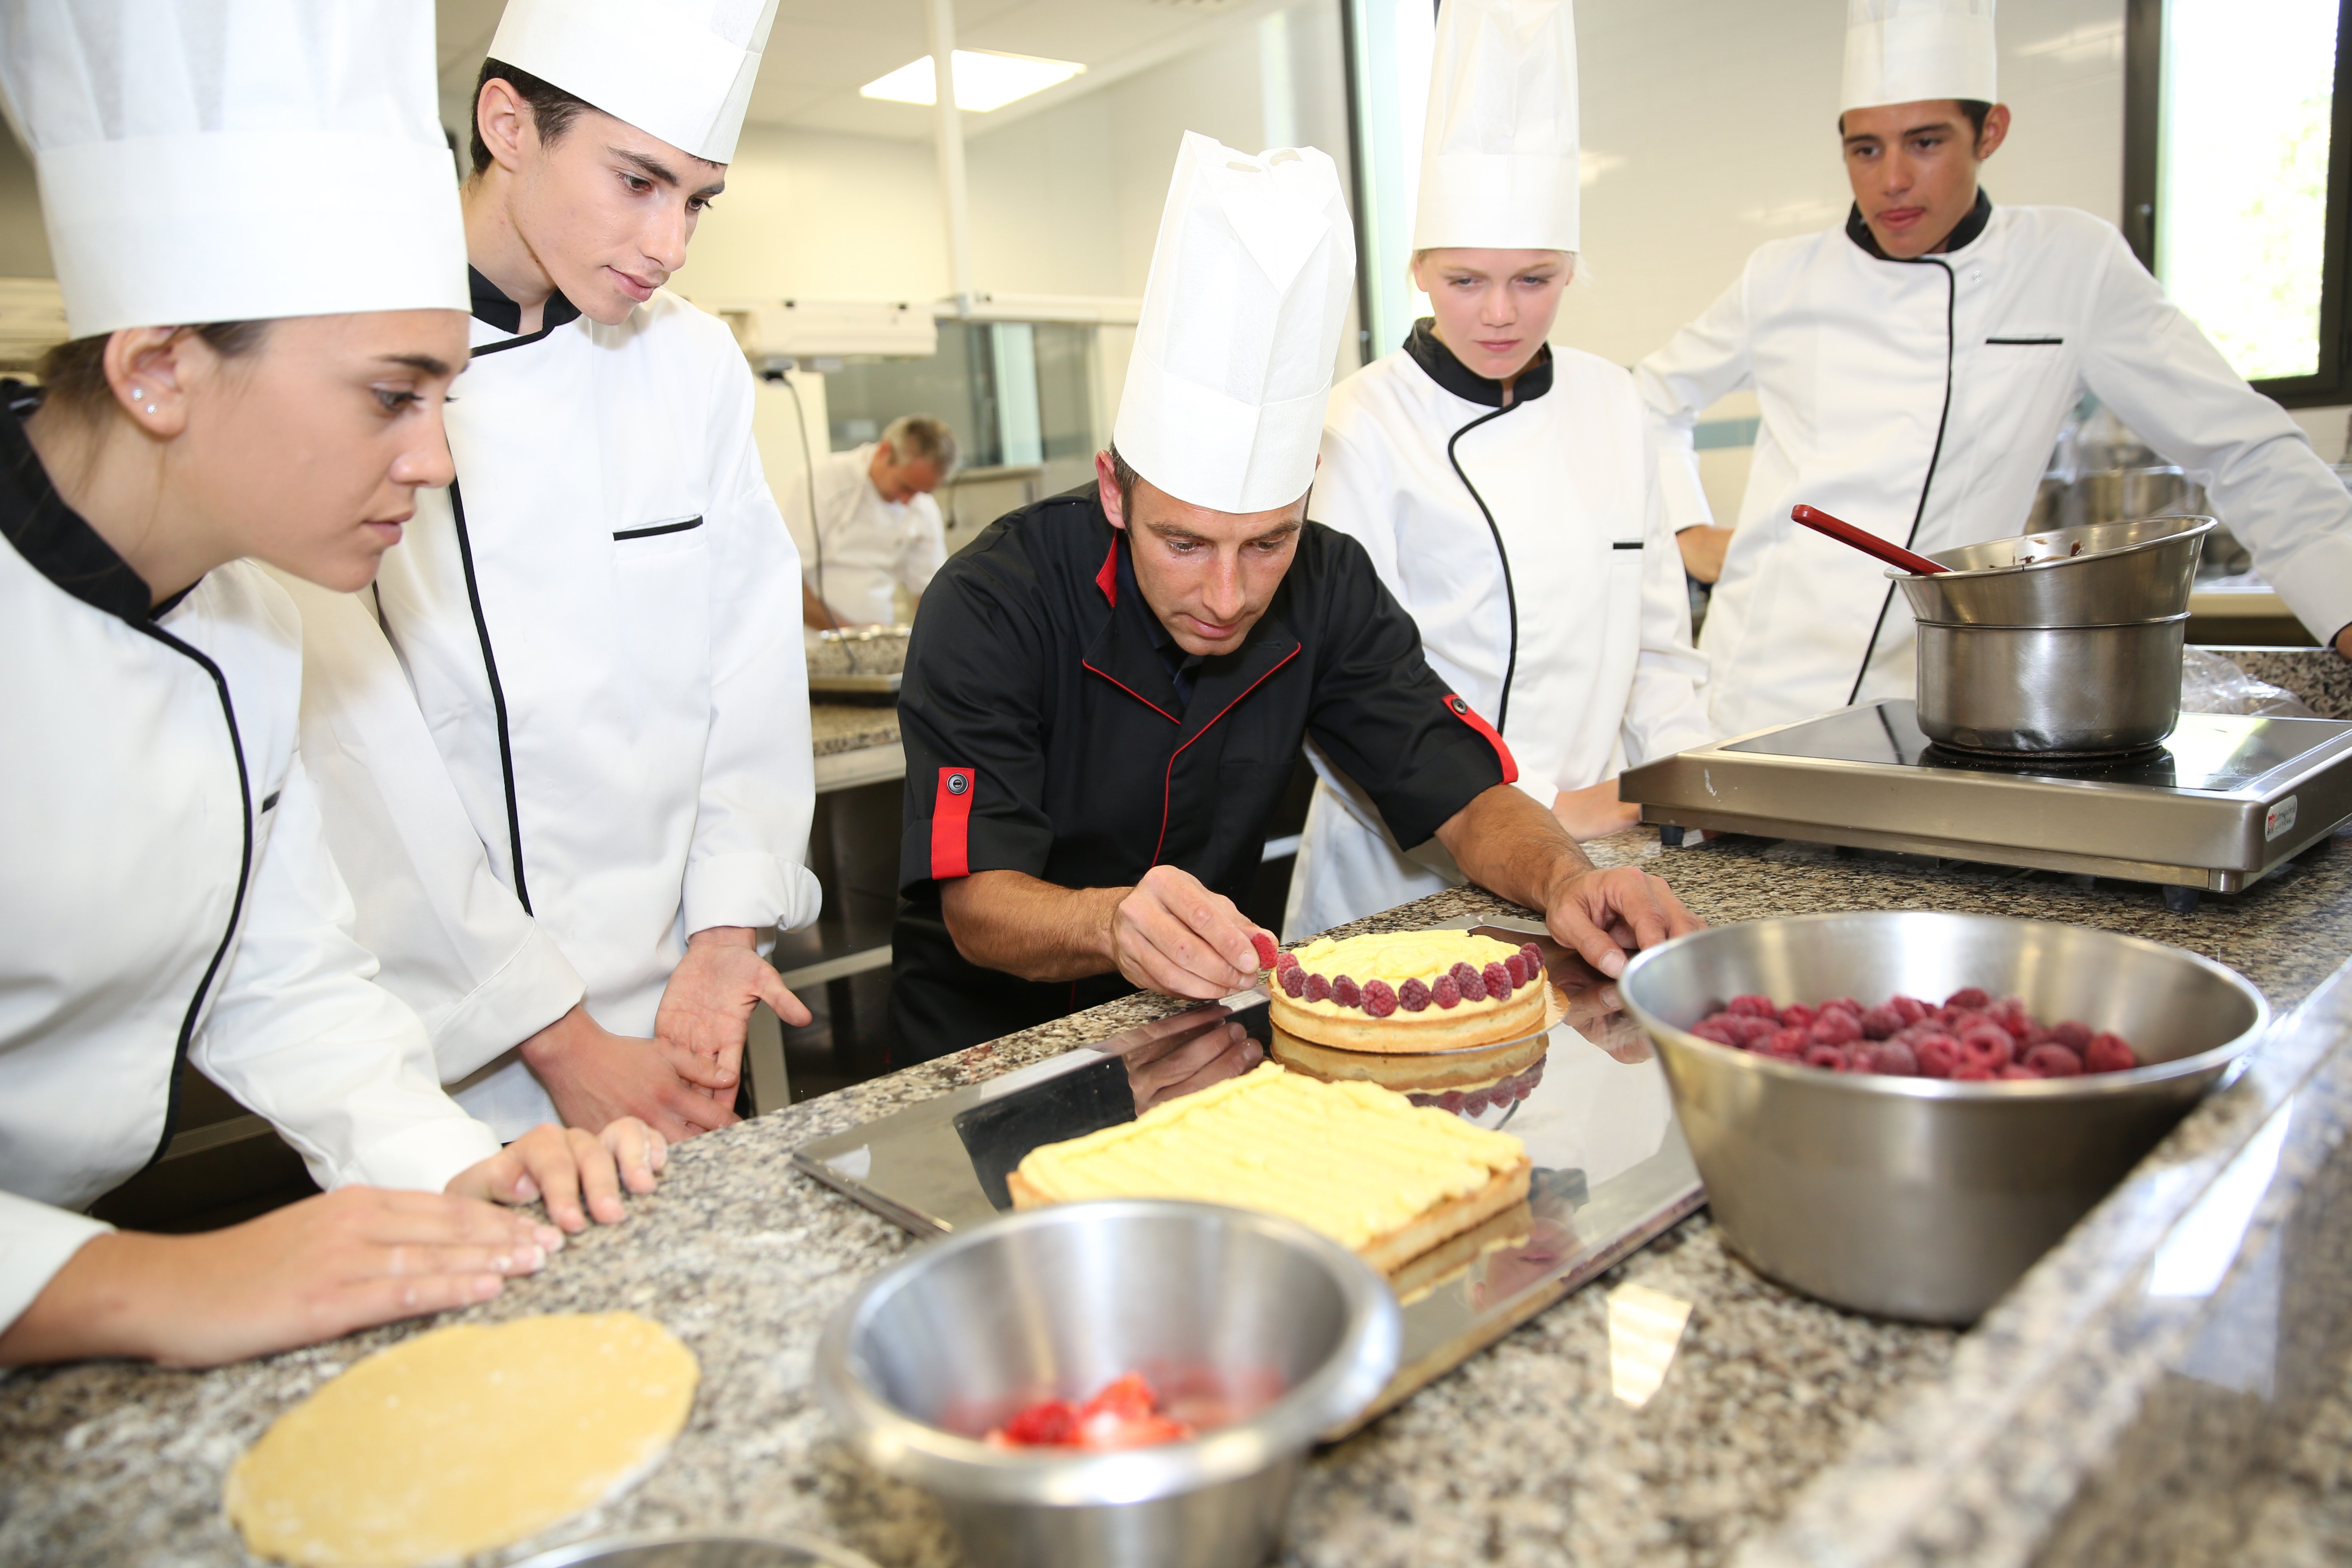 career and technical education culinary arts